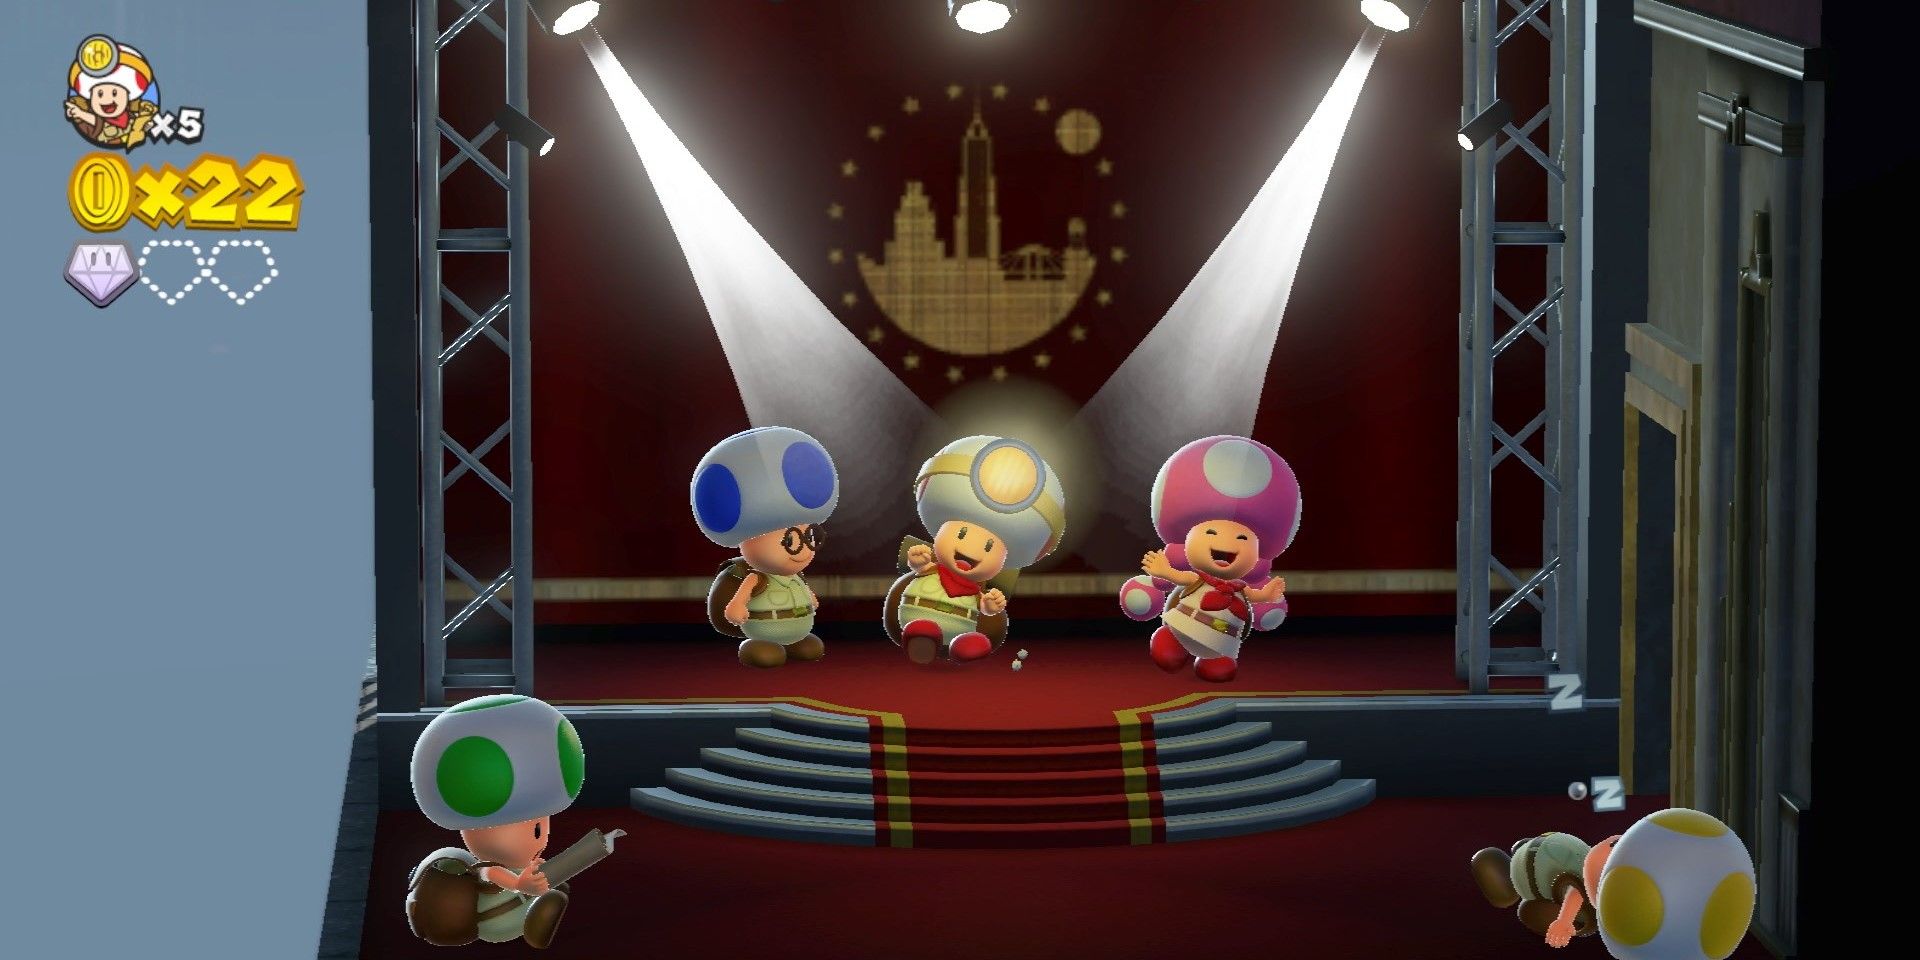 The team together in Captain Toad Treasure Tracker, on what appears to be a stage with spotlights on them